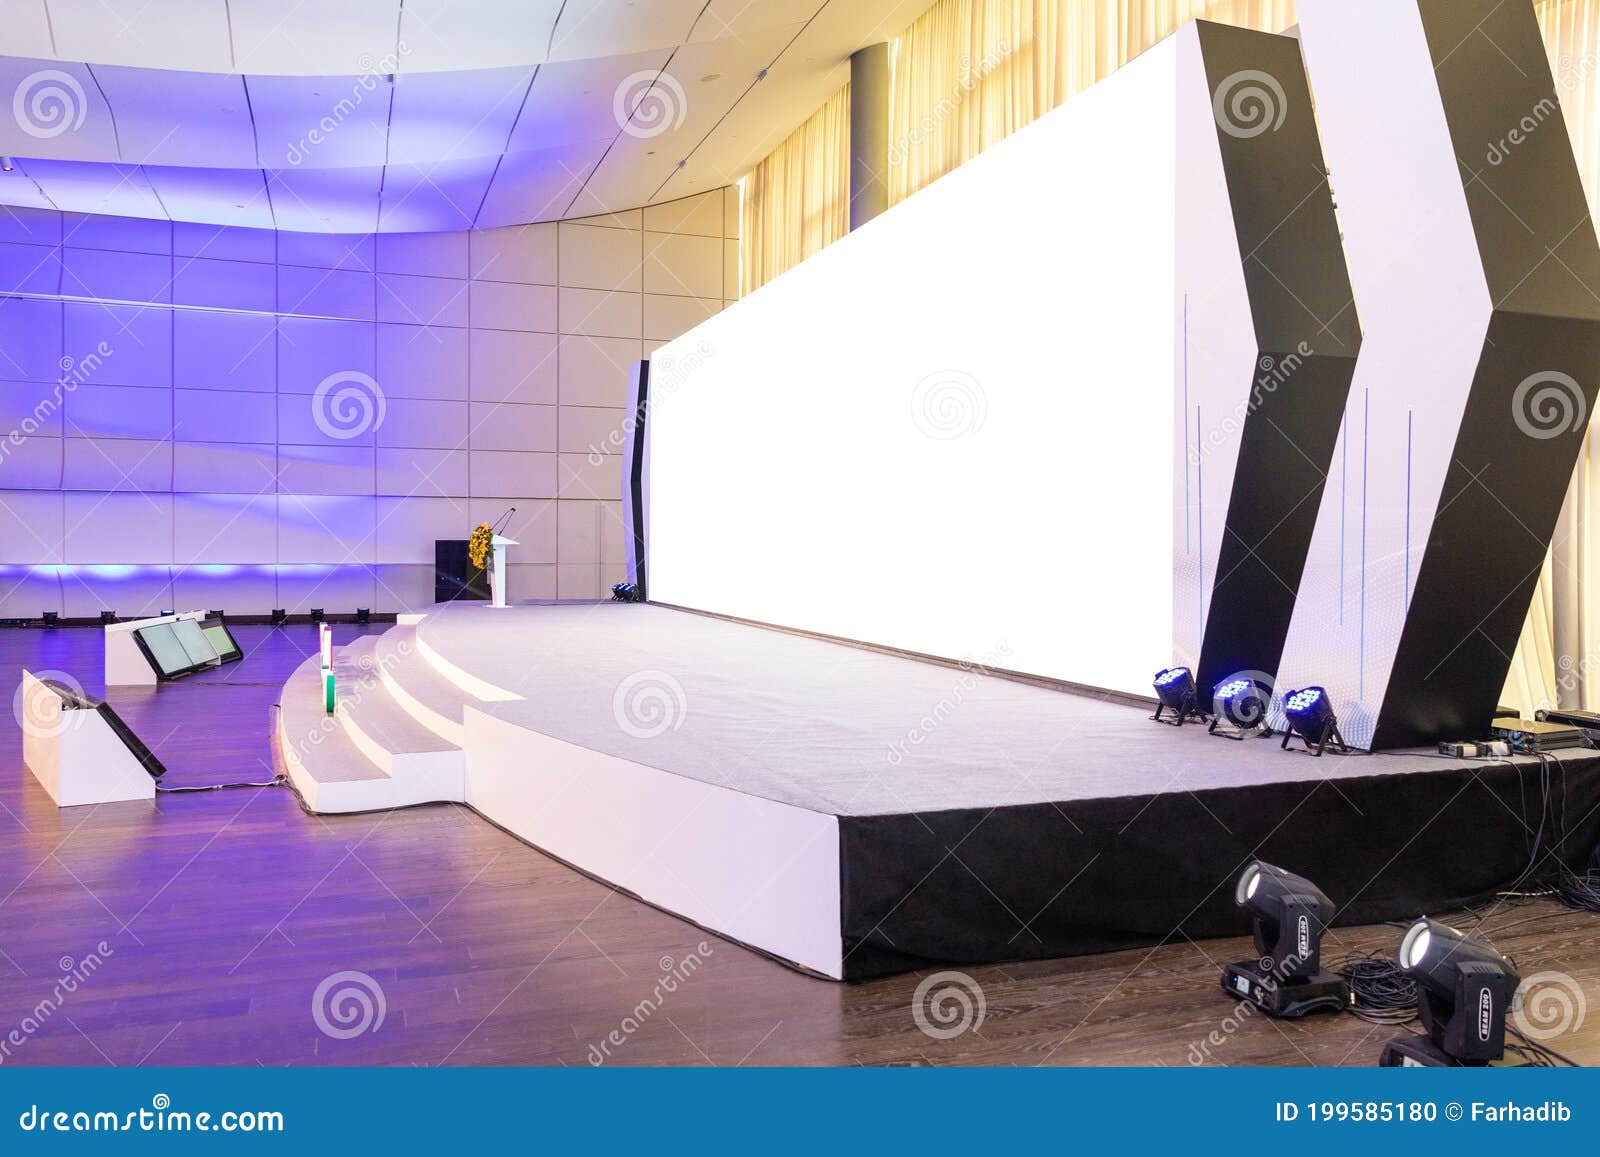 Download 213 Conference Hall Mockup Photos Free Royalty Free Stock Photos From Dreamstime